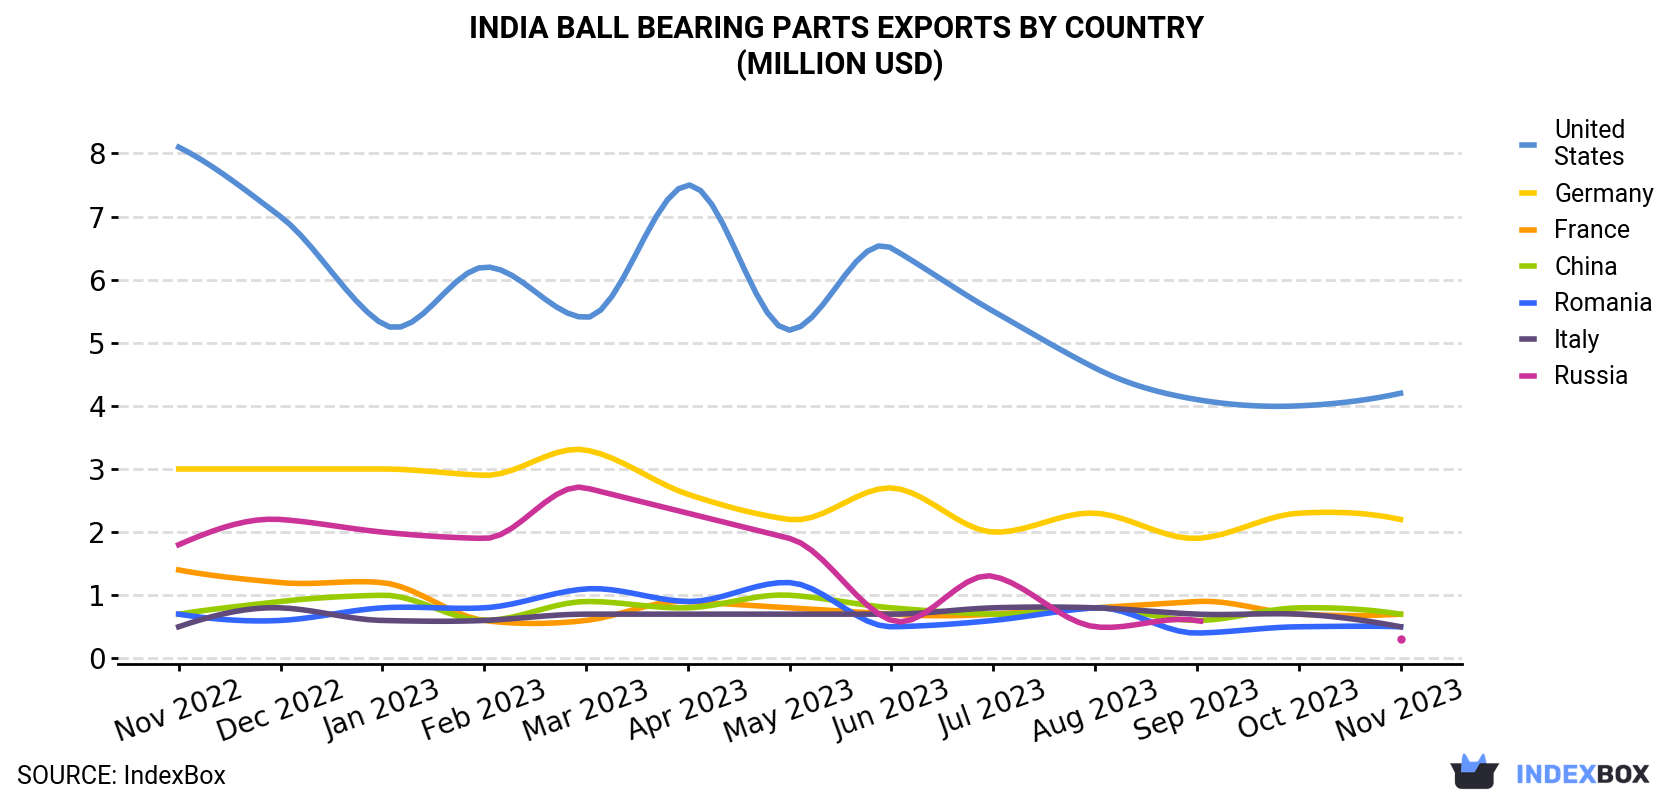 India Ball Bearing Parts Exports By Country (Million USD)